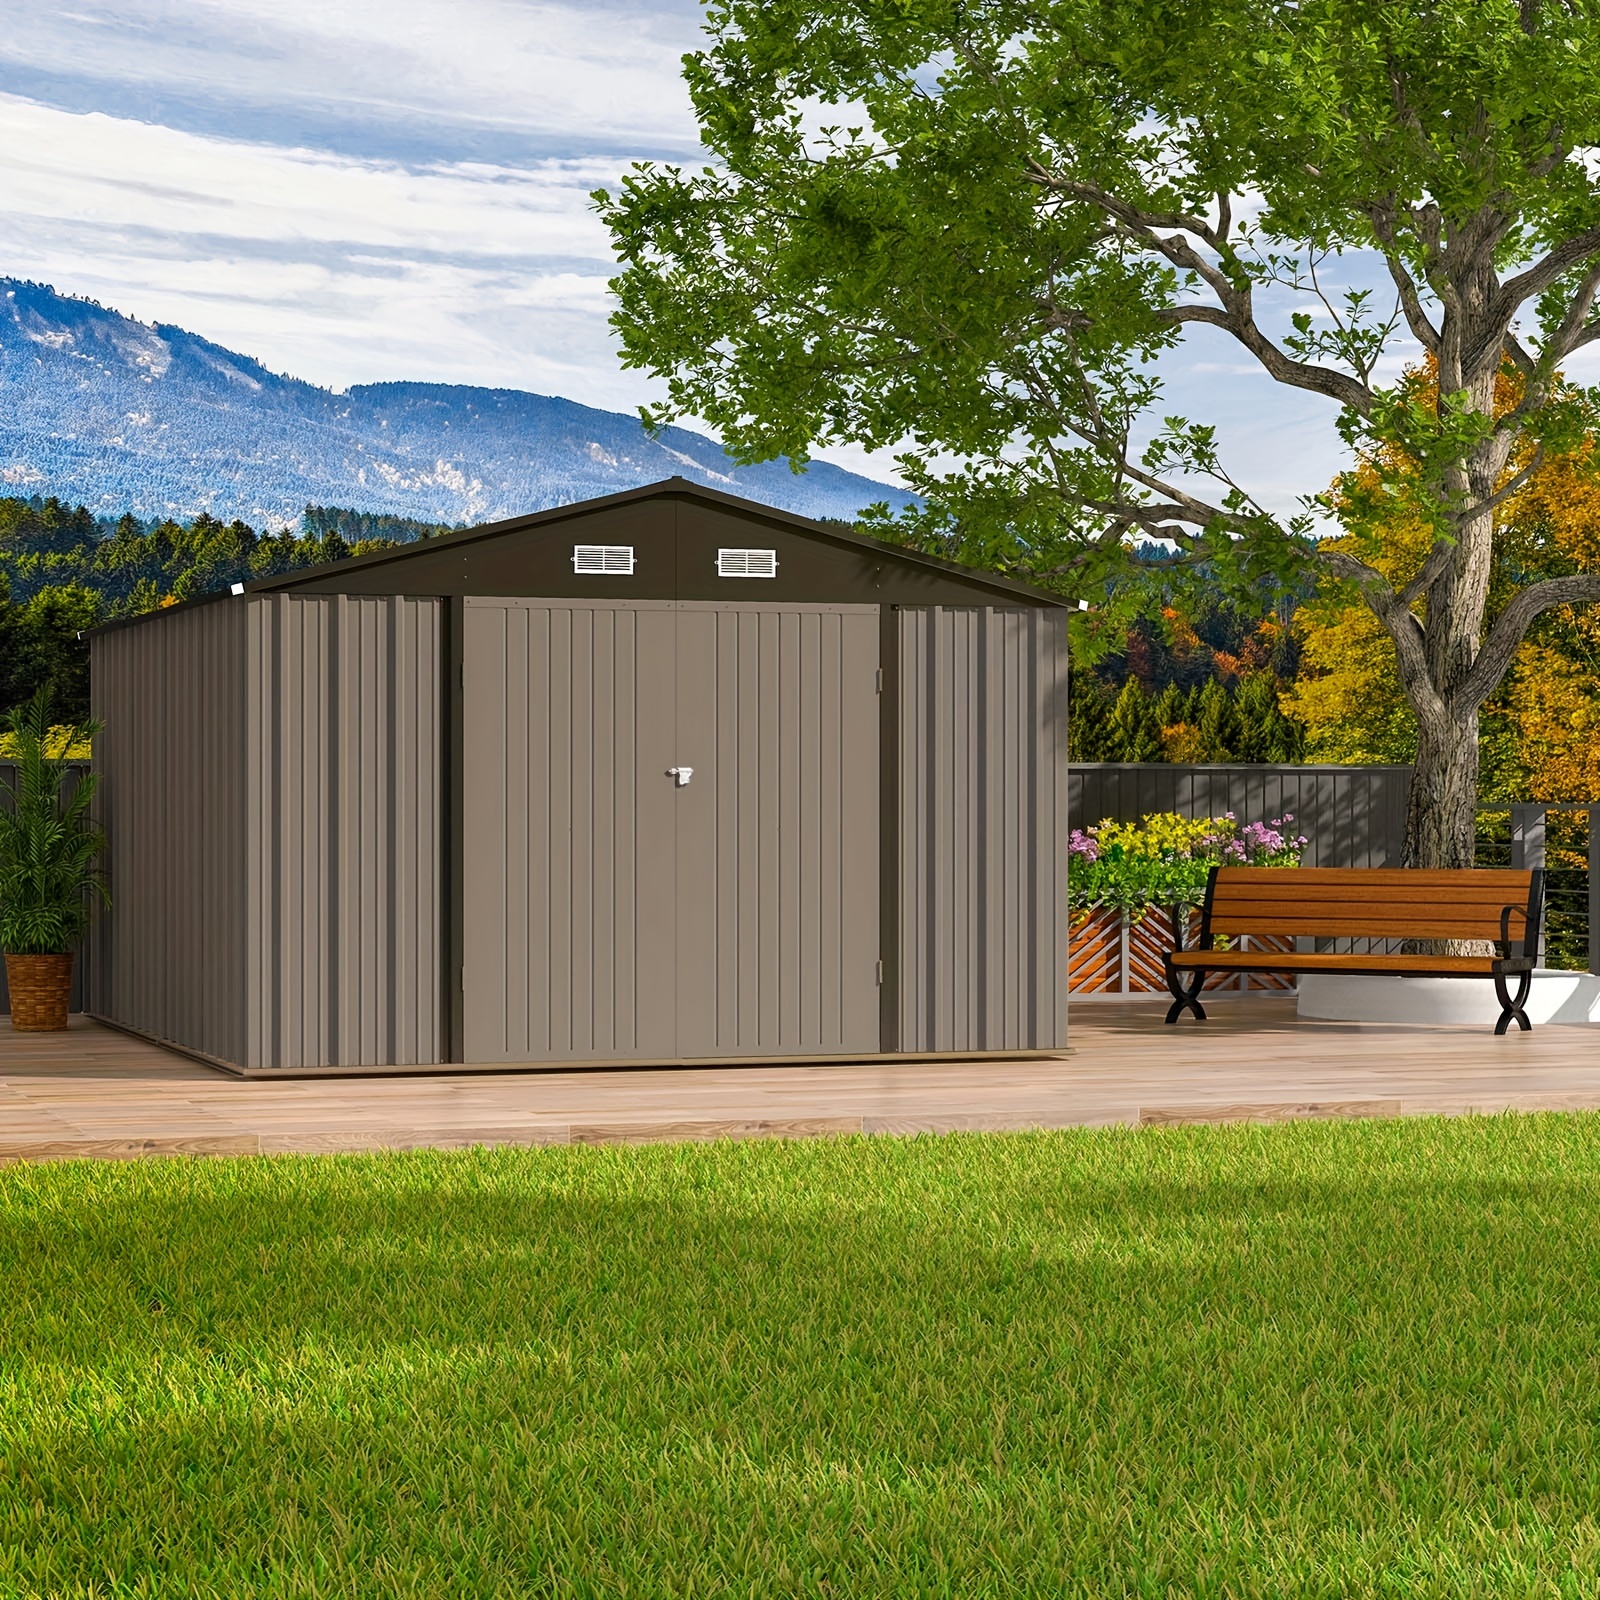 

10' X 12' Outdoor Storage Shed, Large Metal Garden Toold Shed With Lockable Doors For Patio, Backyard And Outside Use